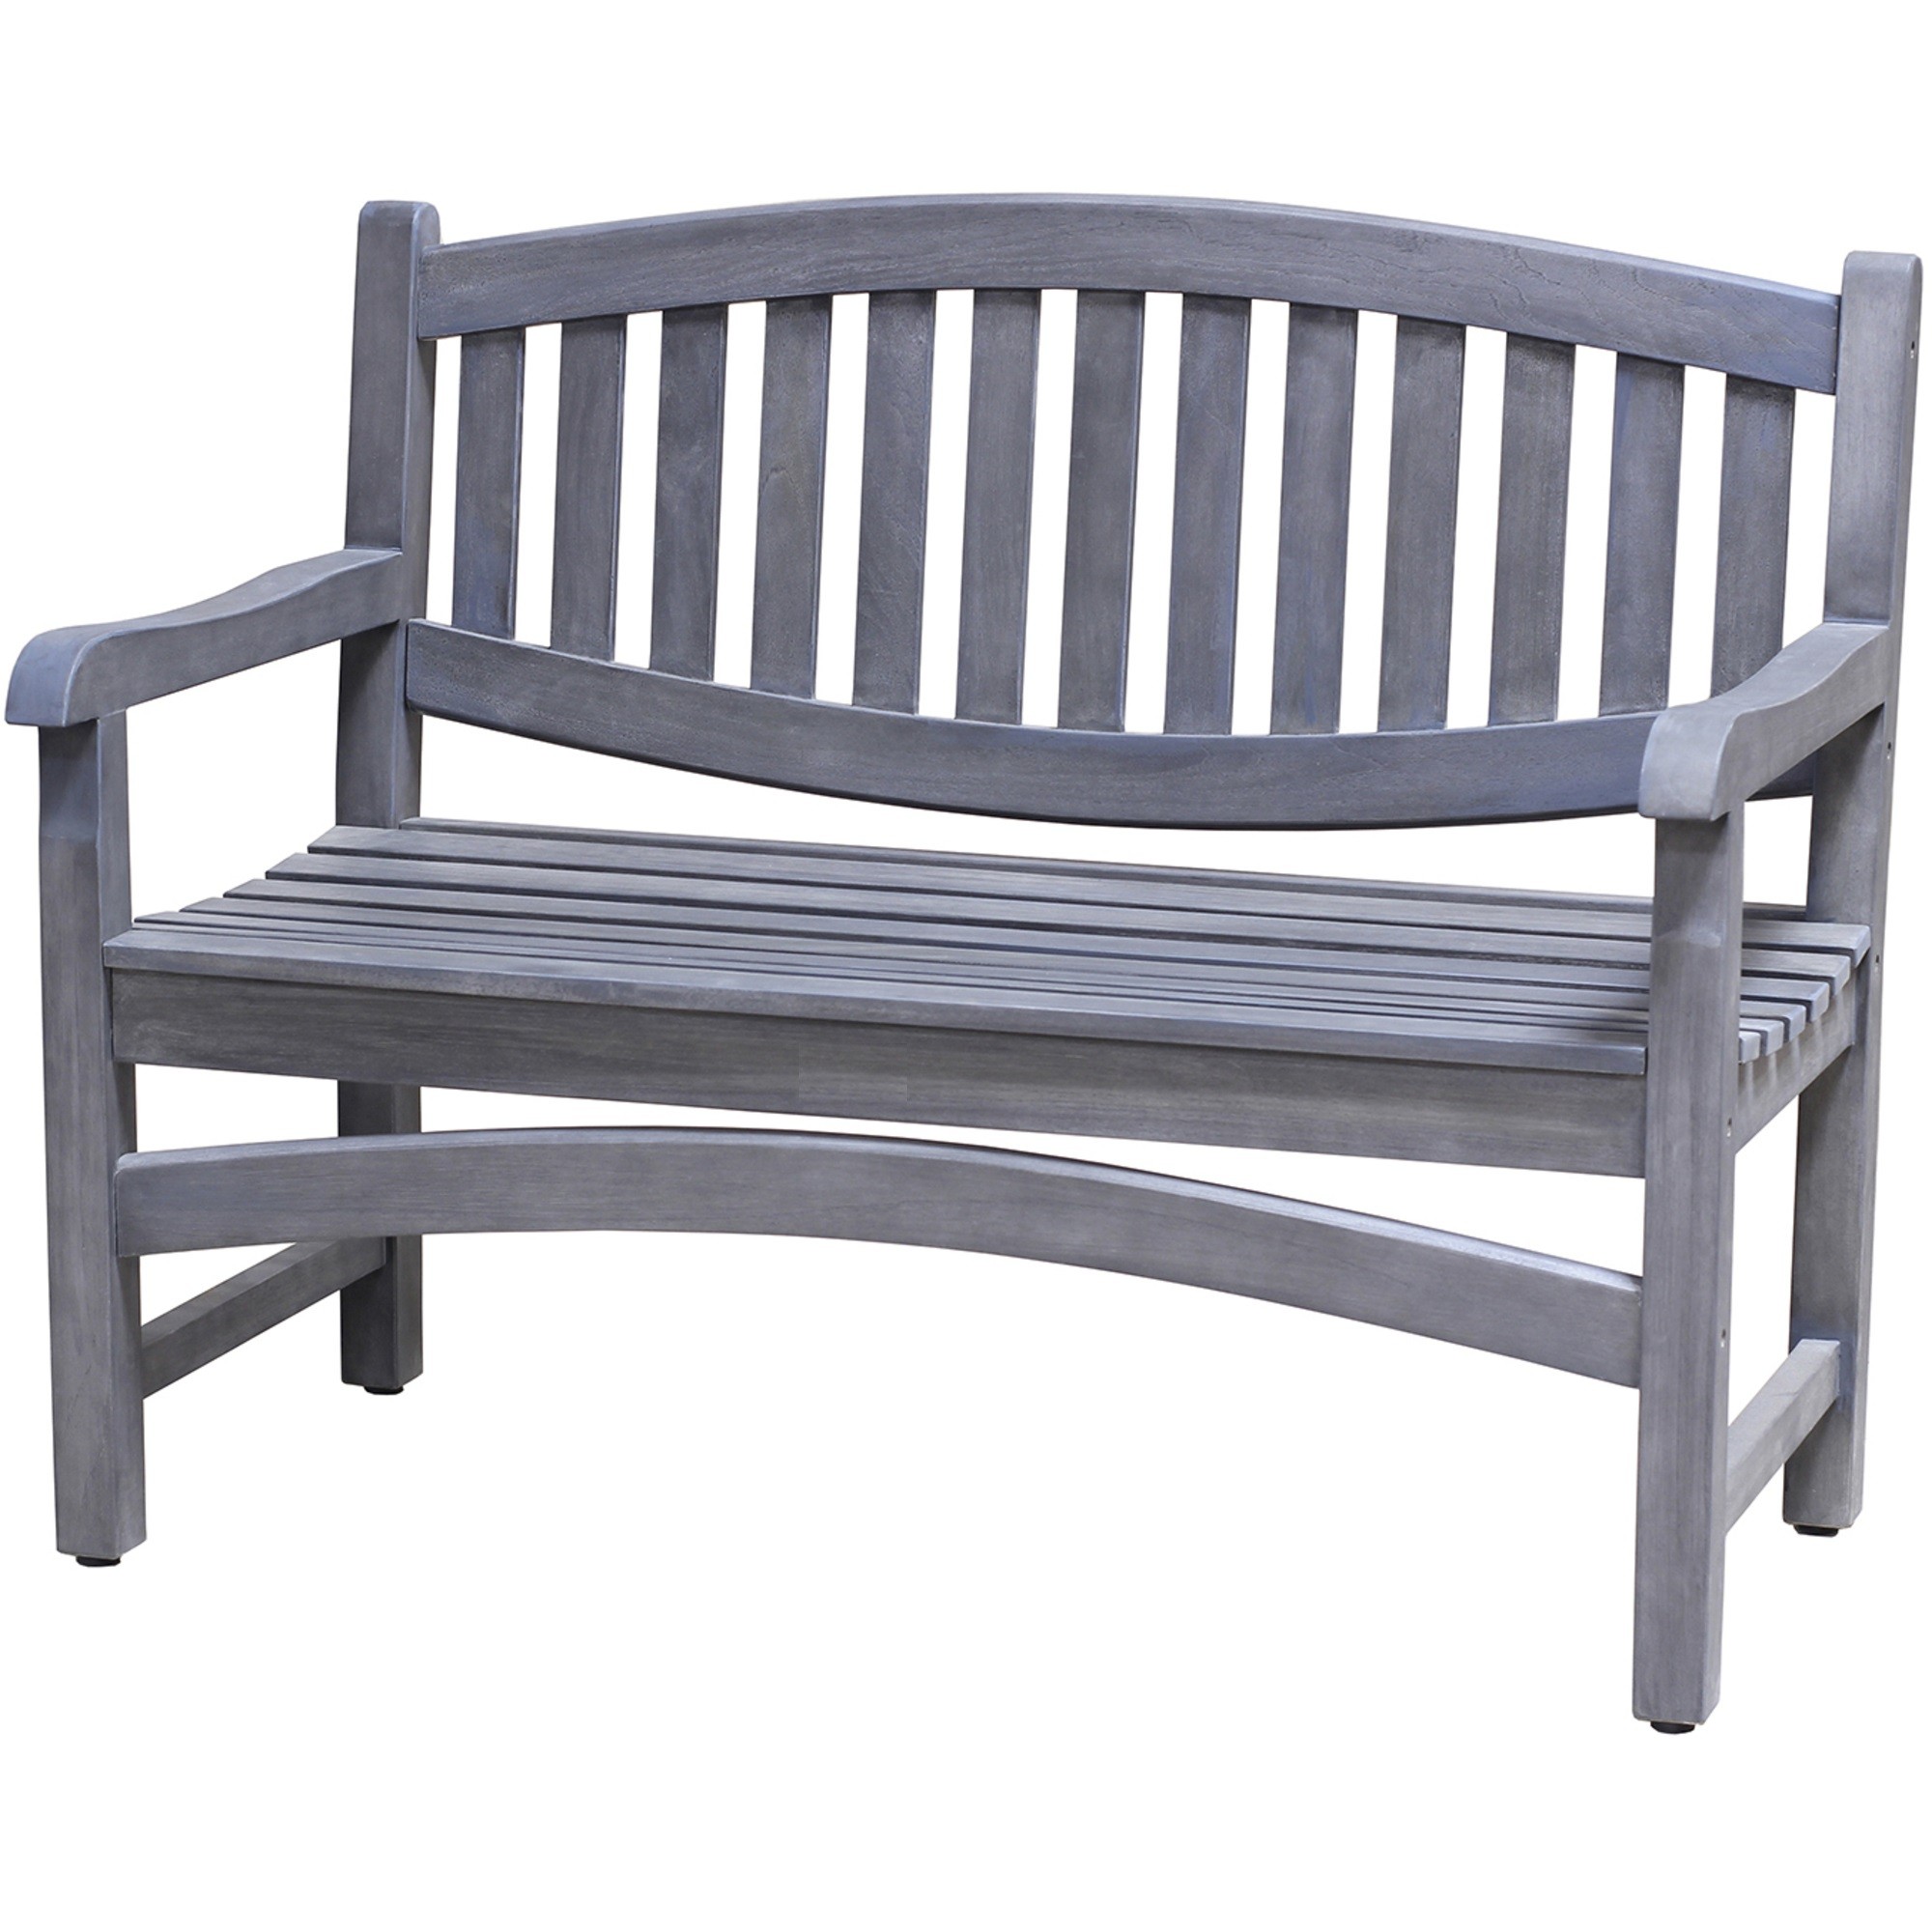 Compact Teak Outdoor Bench with Curved Design in Natural Finish